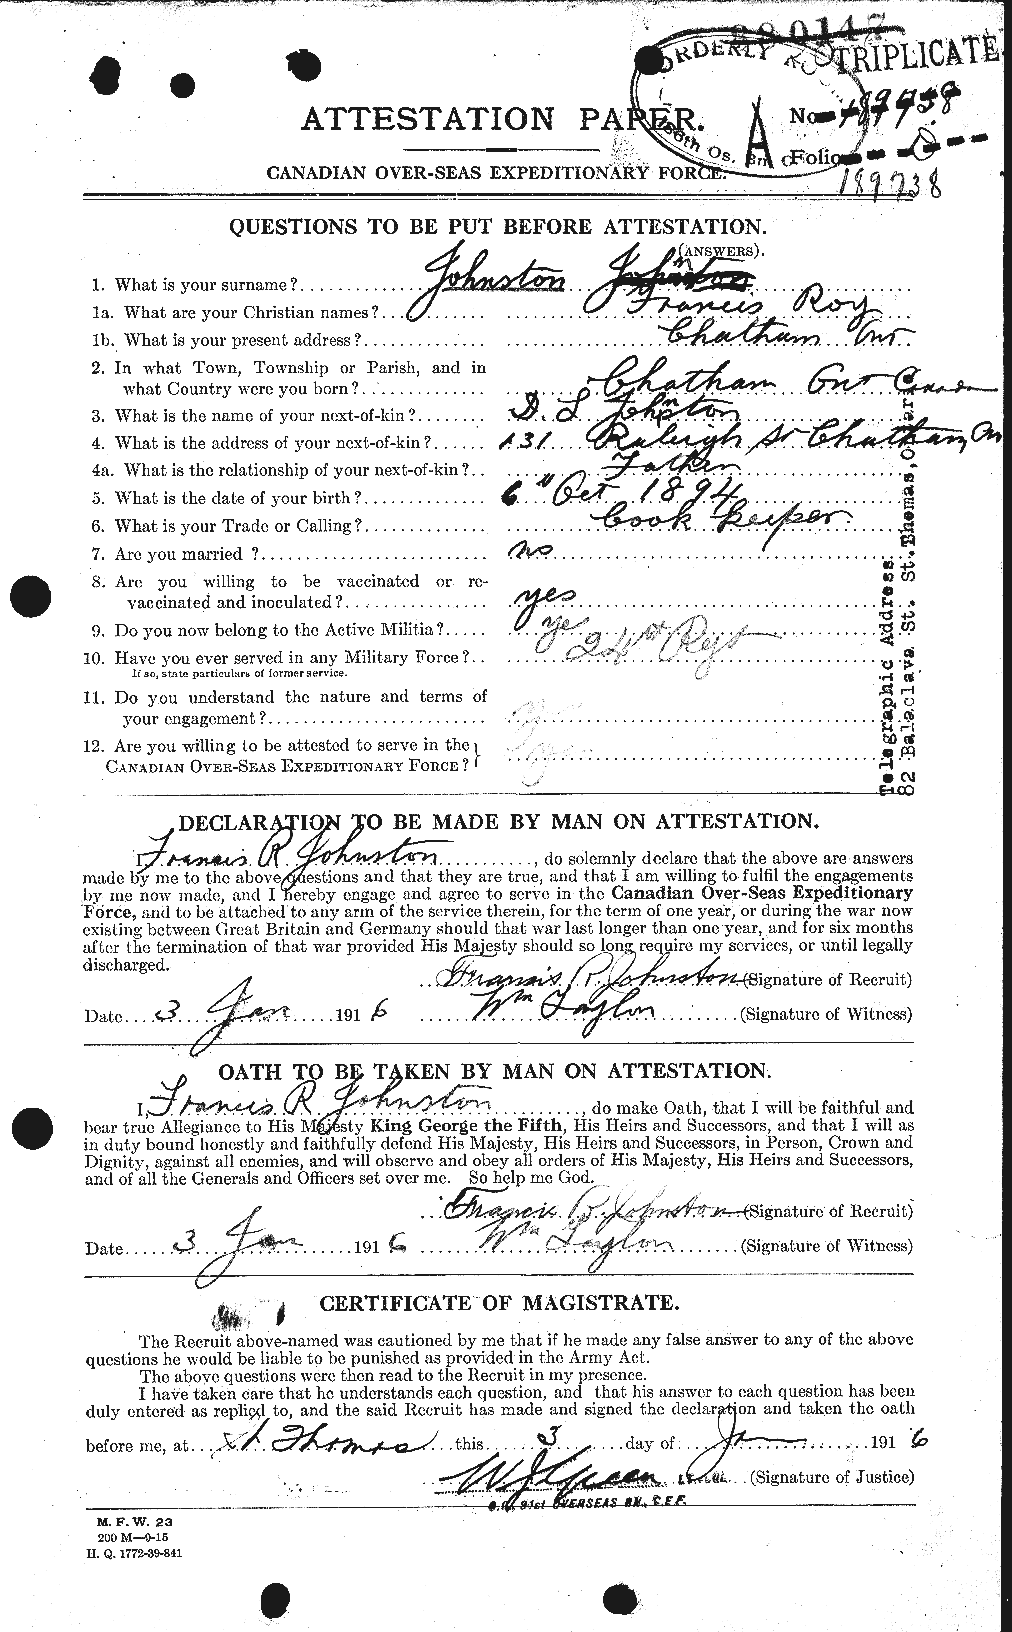 Personnel Records of the First World War - CEF 423263a